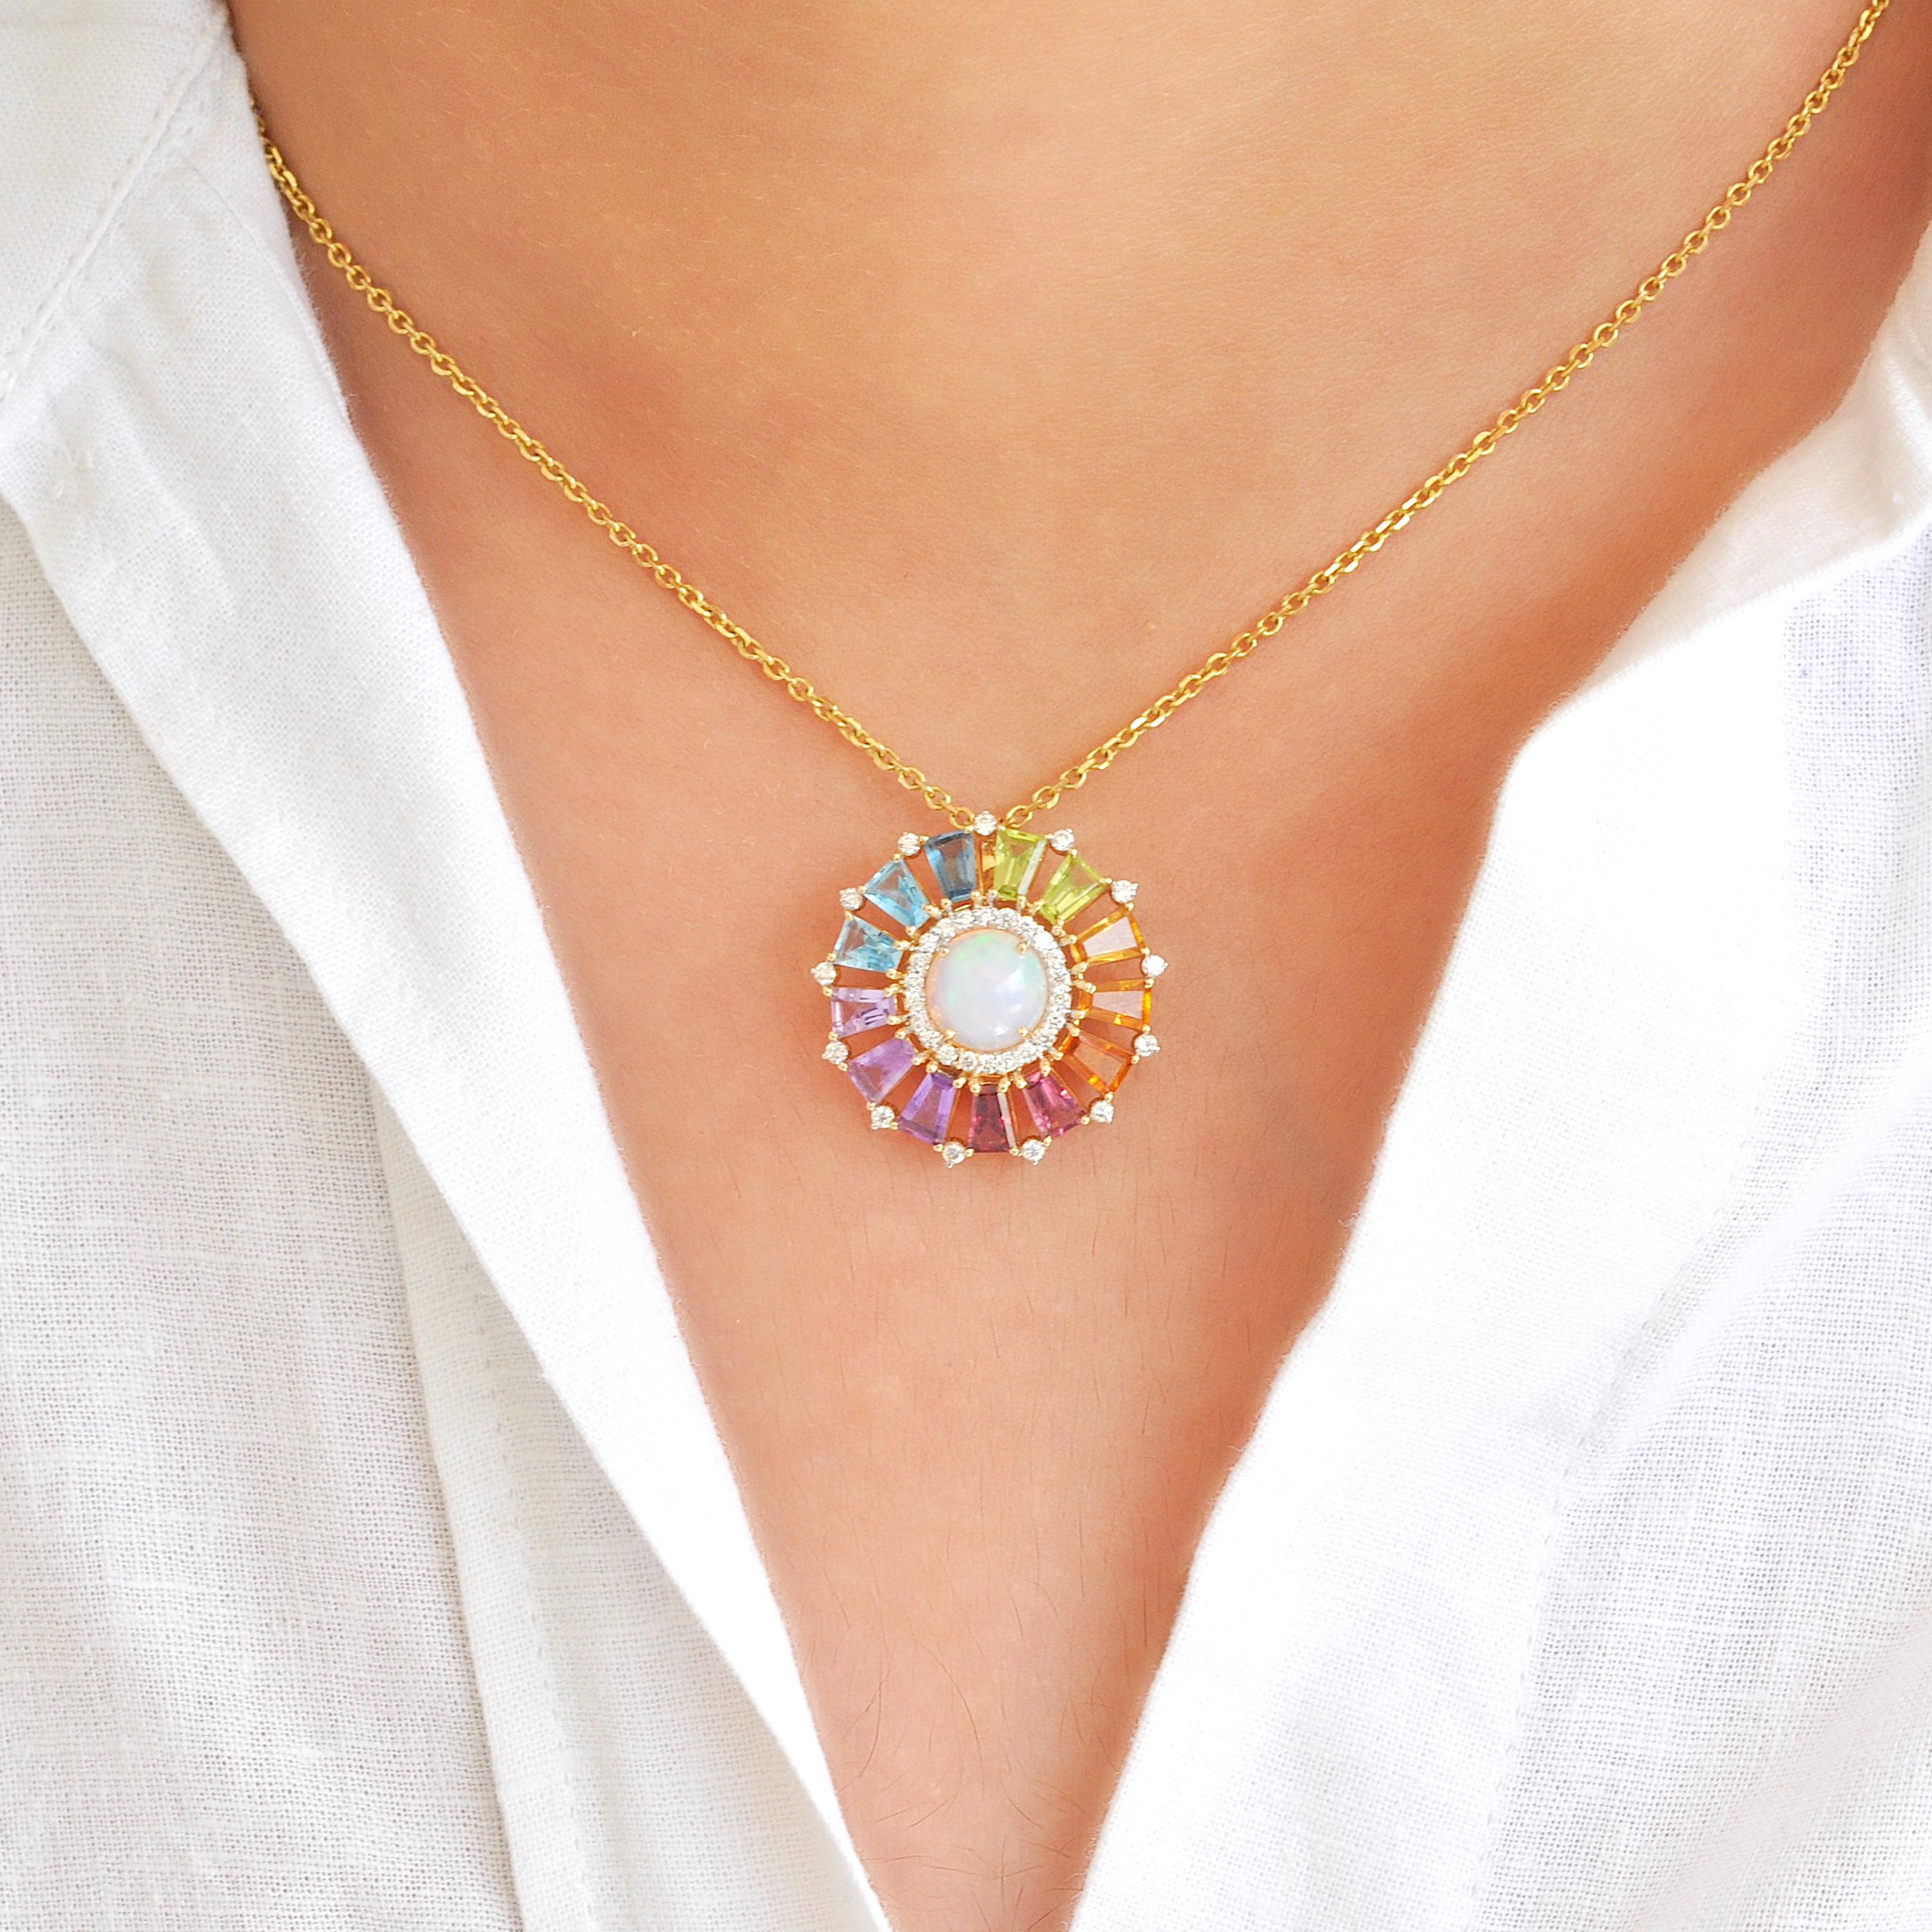 18 karat gold tapered baguettes rainbow gemstones ferris wheel opal diamond circle pendant.

This Ferris Wheel pendant necklace is a mesmerizing blend of color and elegance. Carefully crafted, this necklace features a circle of prong-set rainbow